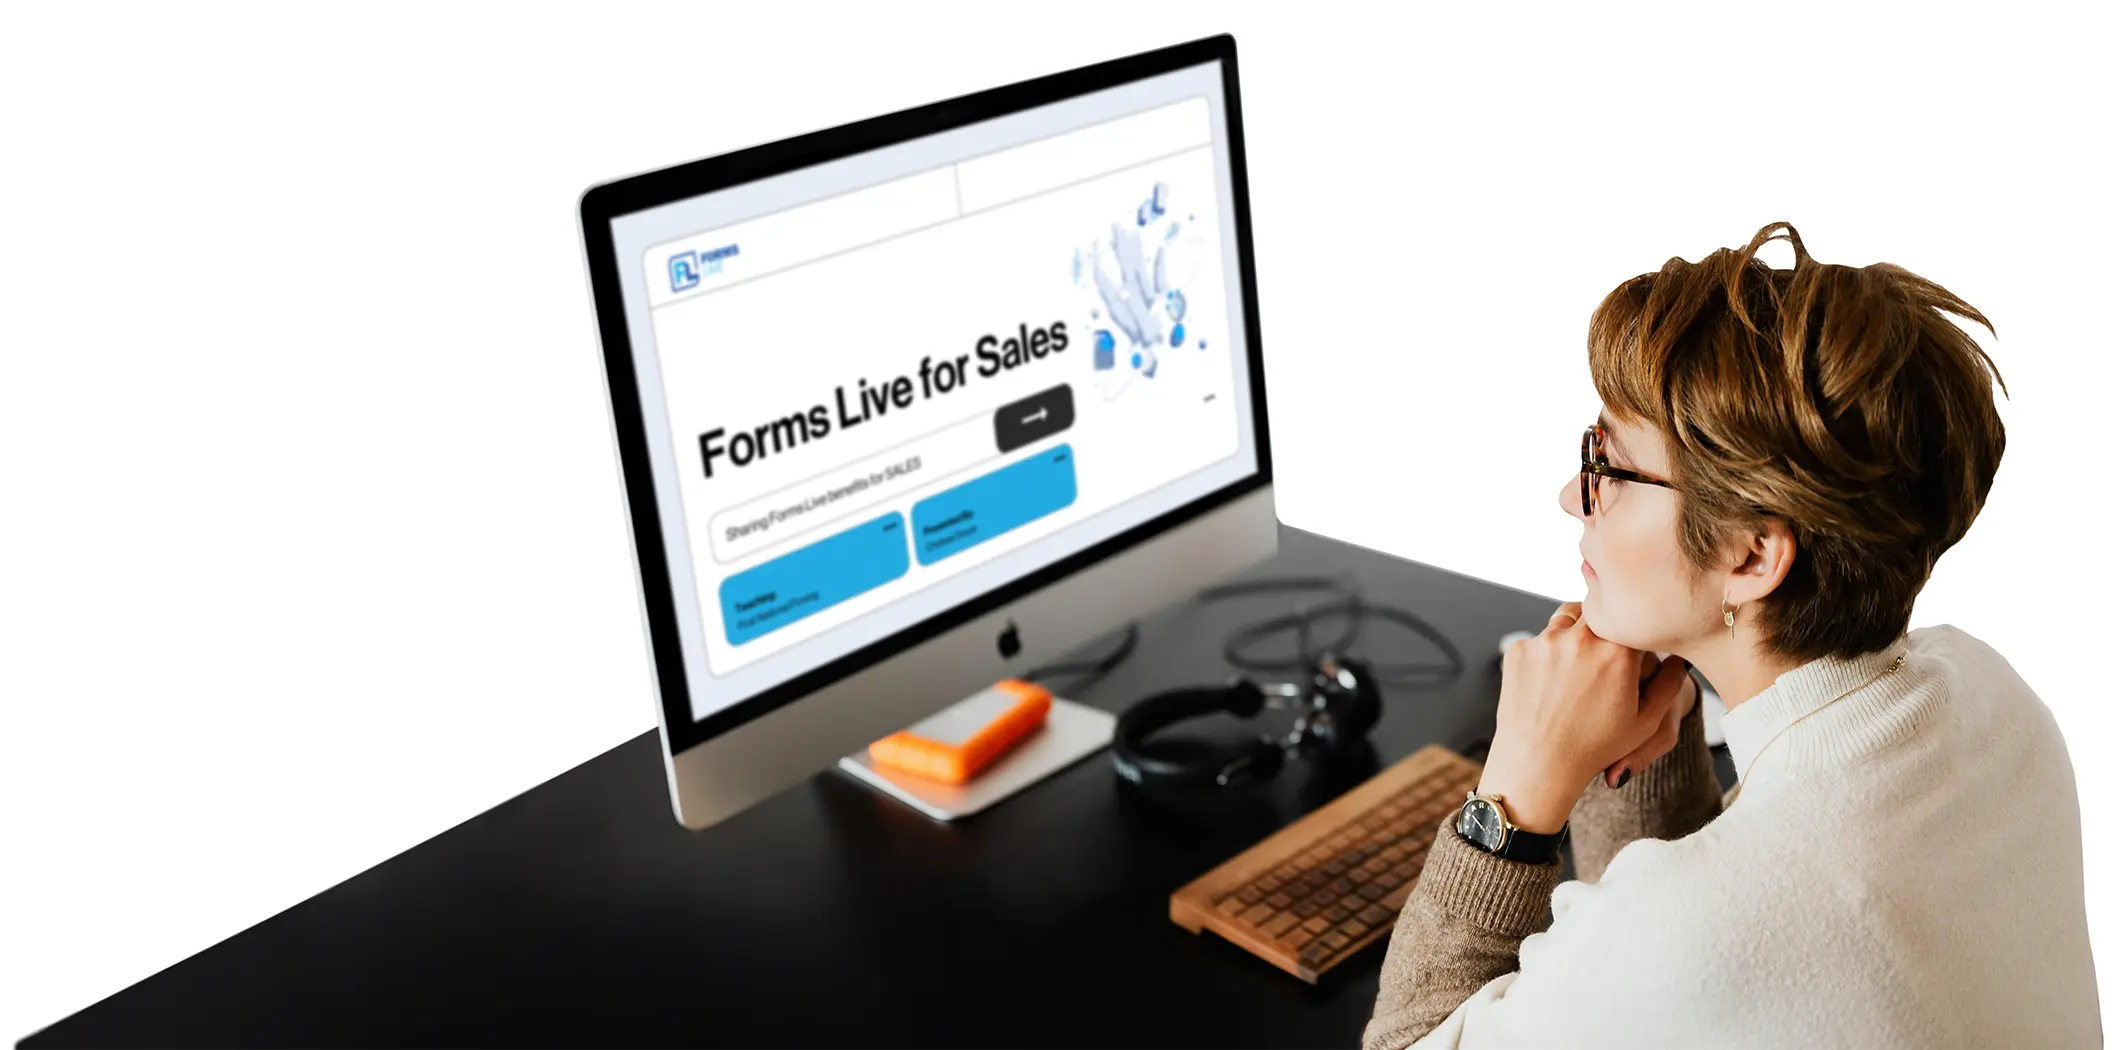 Forms Live user participating in training